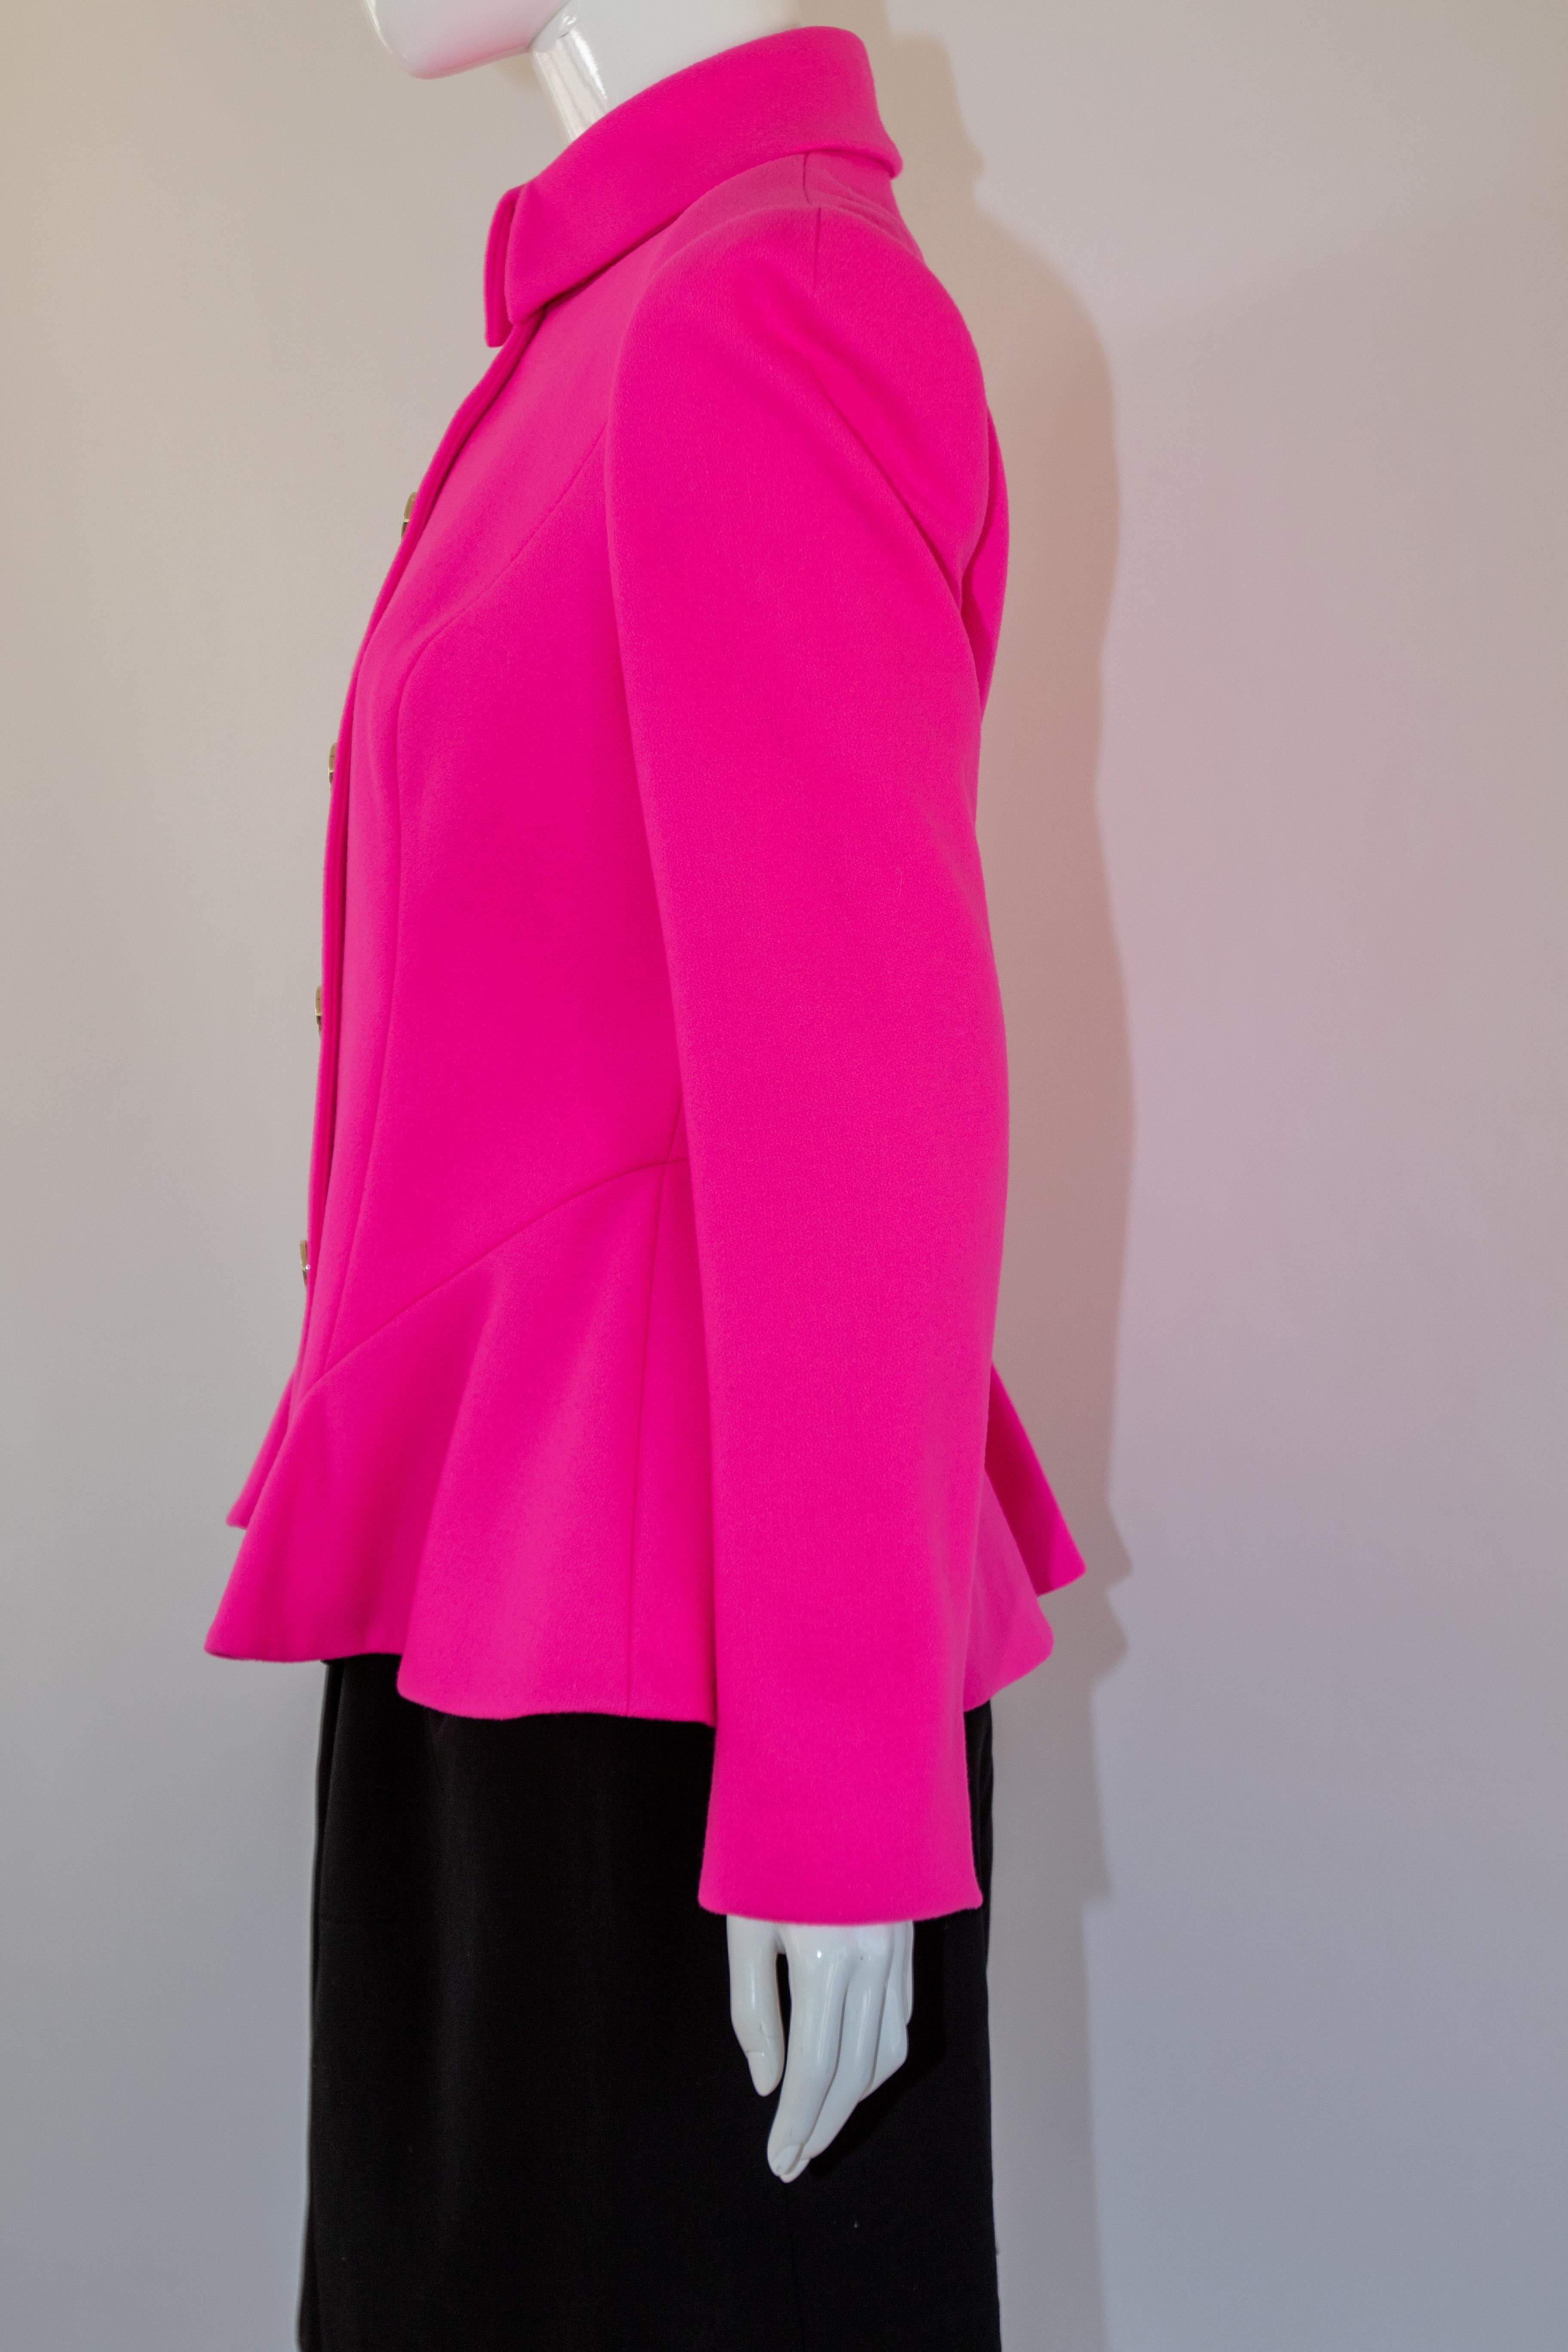 Ted Baker Hot Pink Peplum Jacket In Good Condition In North Hollywood, CA